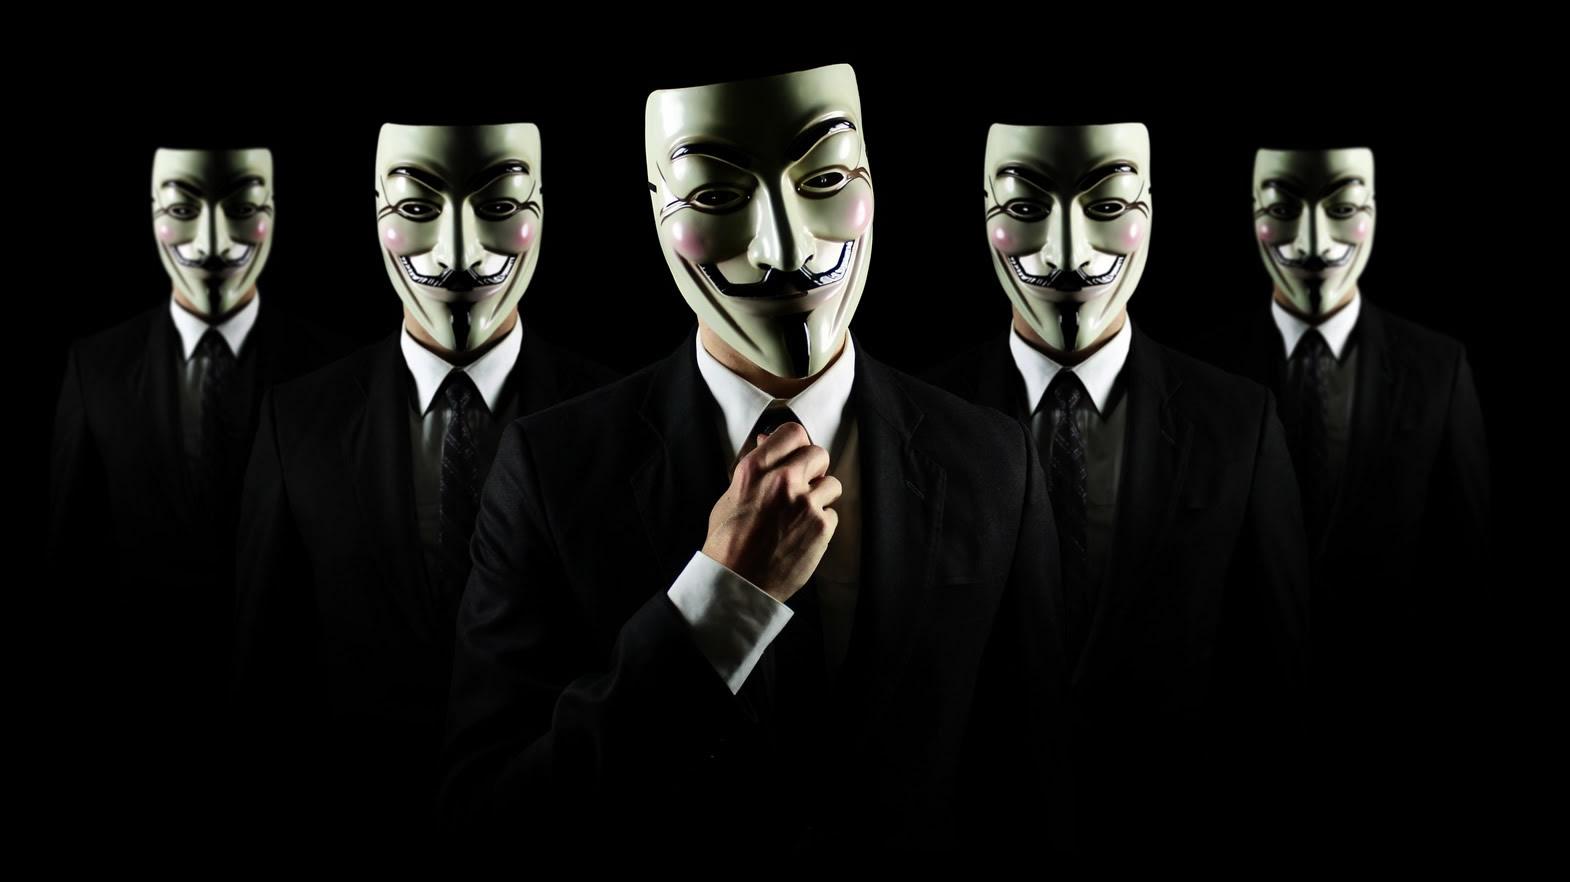 anonymous-hacktivists